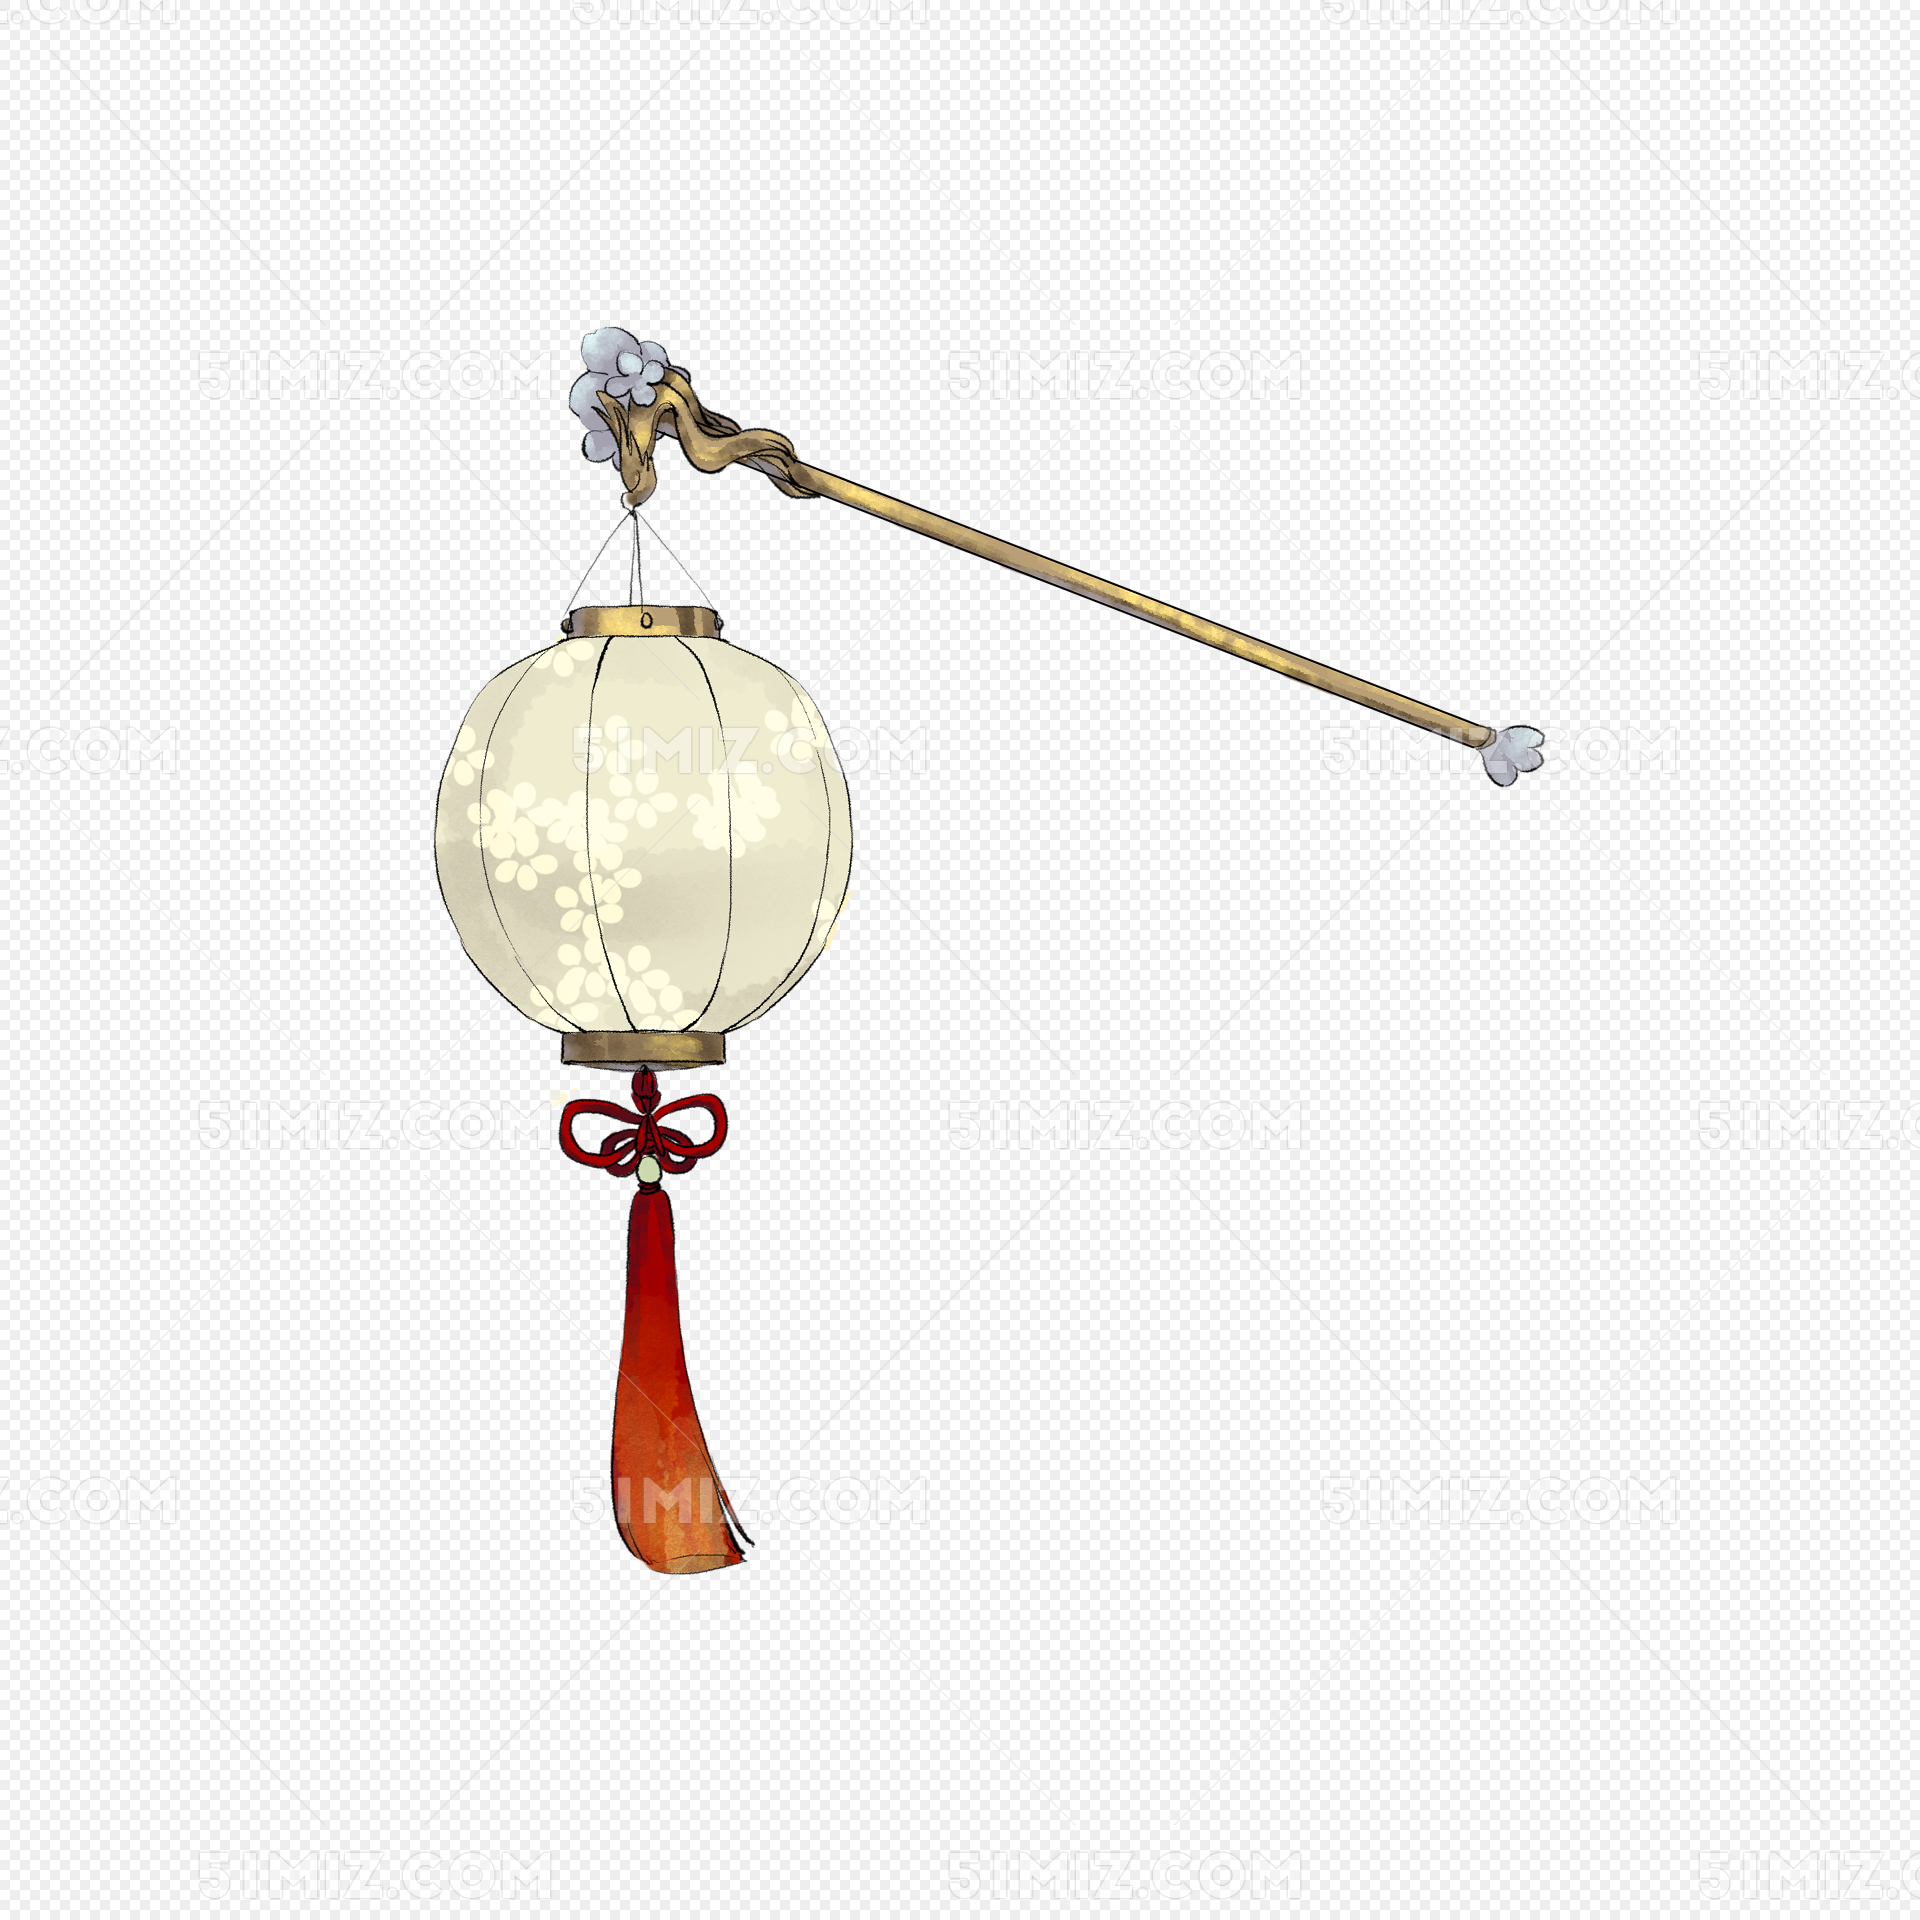 Chinese New Year PNG transparent image download, size: 1299x1635px